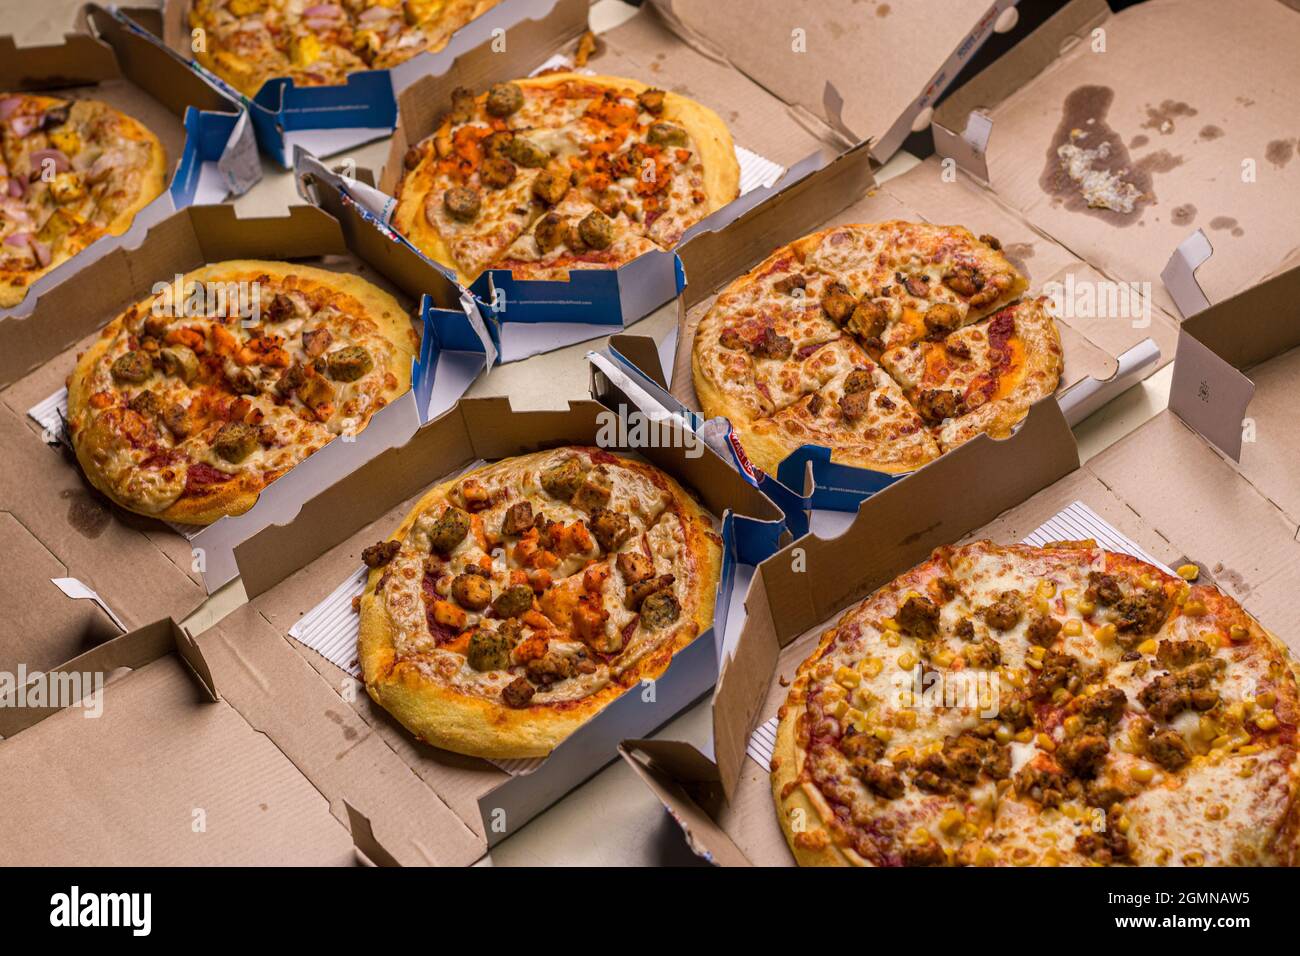 West Bangal, India - August 21, 2021 : Dominos pizza on box stock image. Stock Photo